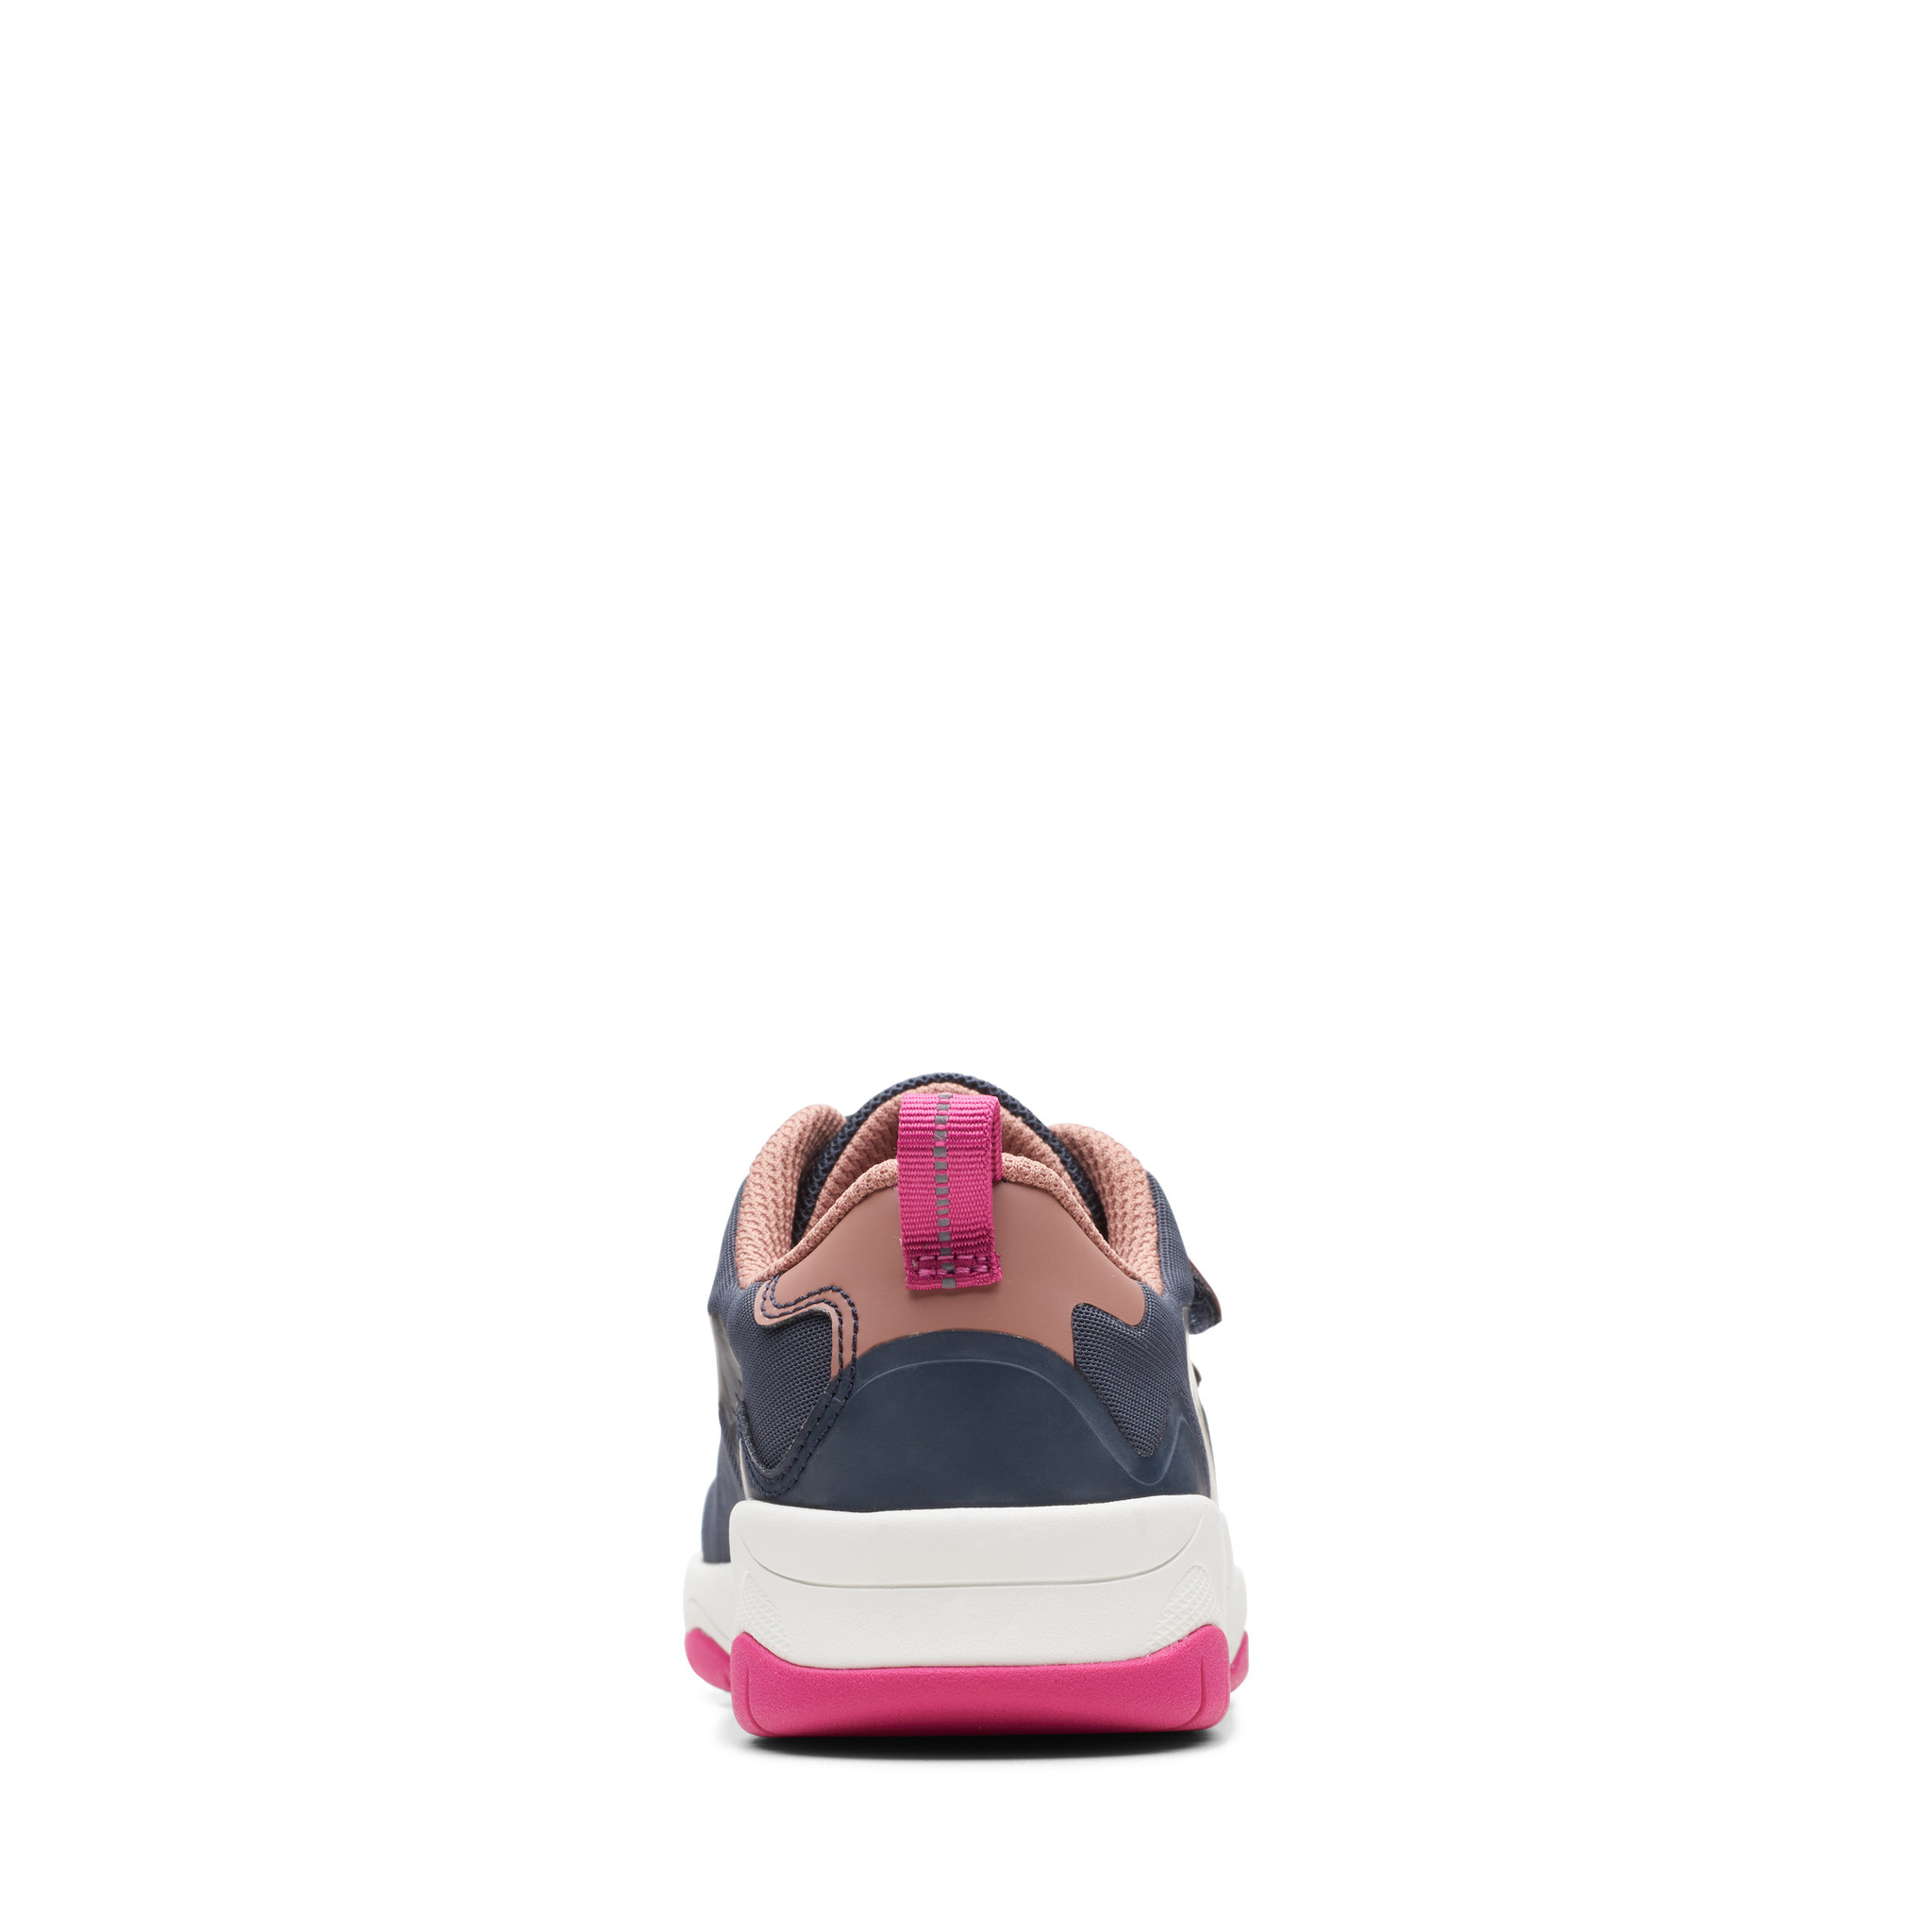 Clarks ClowderRace Navy Pink Youth